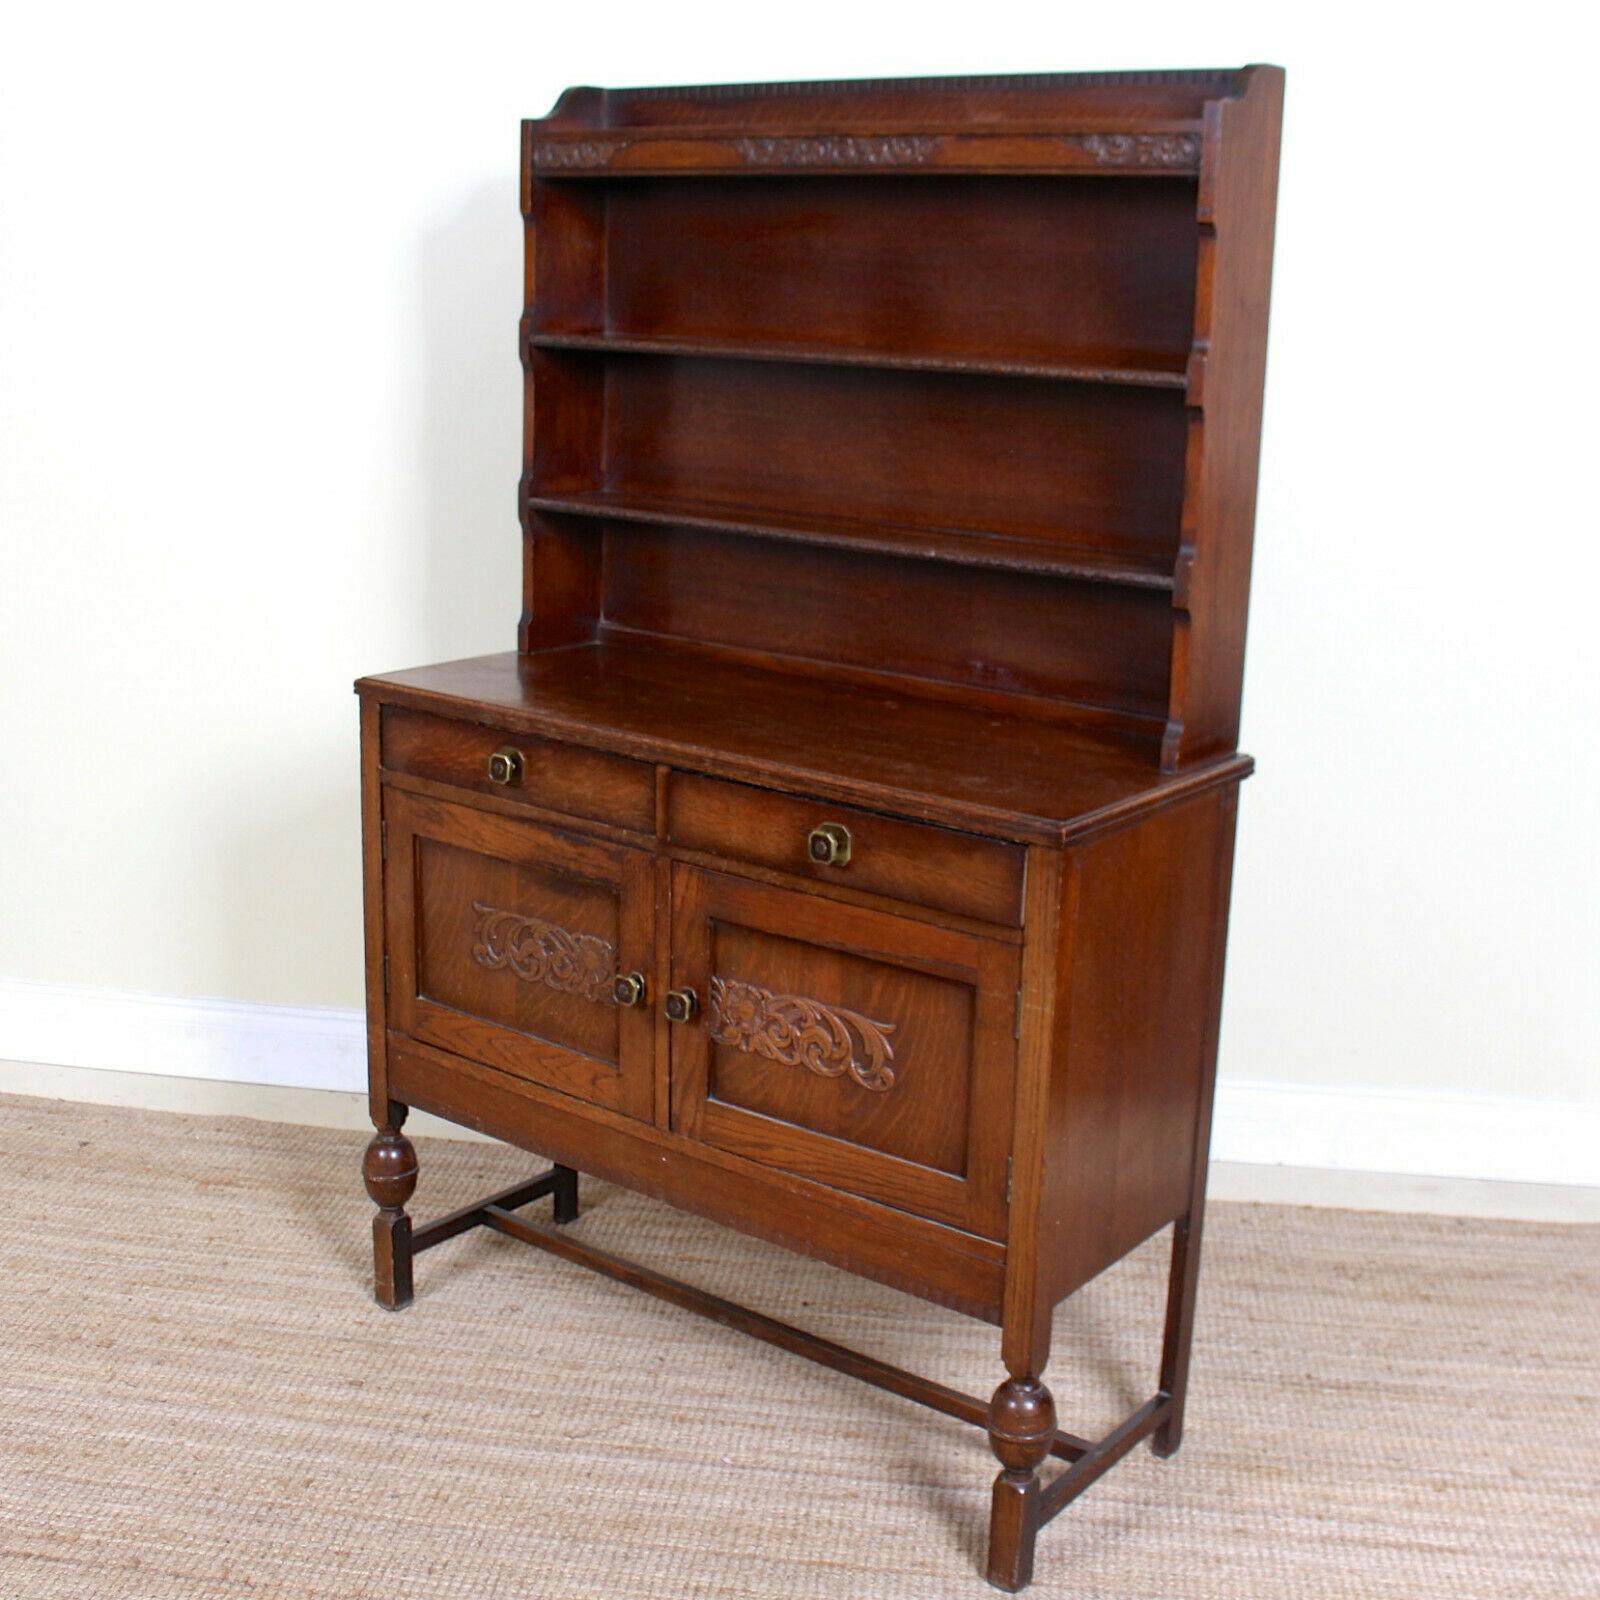 An impressive oak dresser in the Arts & Crafts manner.

The oak boasting a well figured grain.

The upper section with carved frieze and shelving. The lower section fitted two drawers above carved paneled doors enclosed storage and raised on